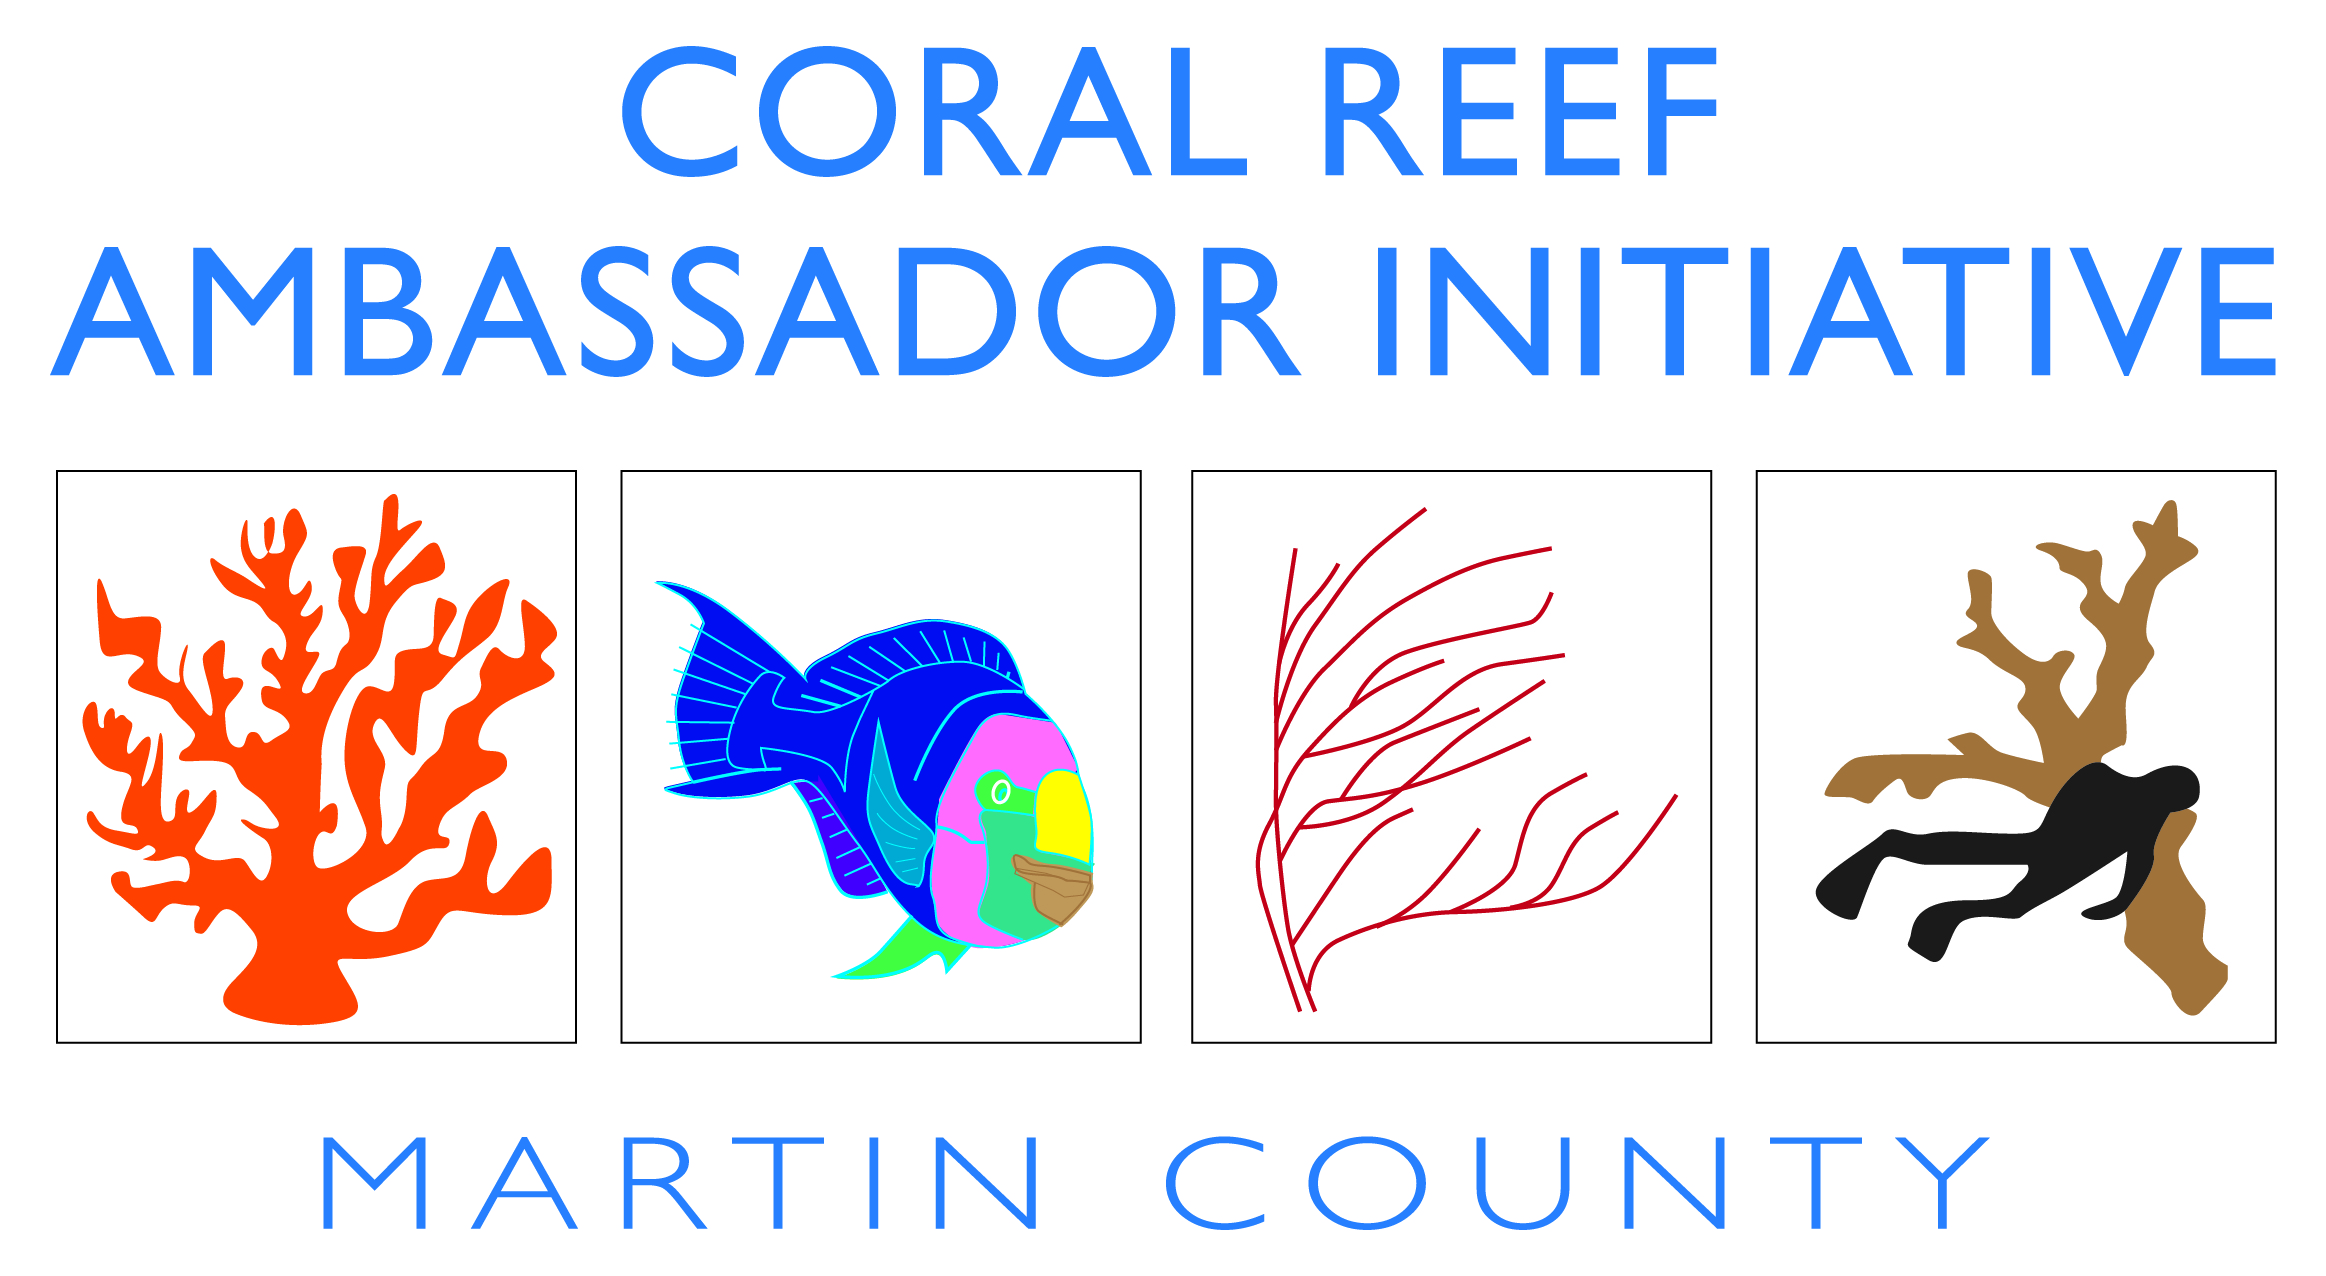 The official logo for the Coral Reef Ambassador Initiative, Broward County Florida.